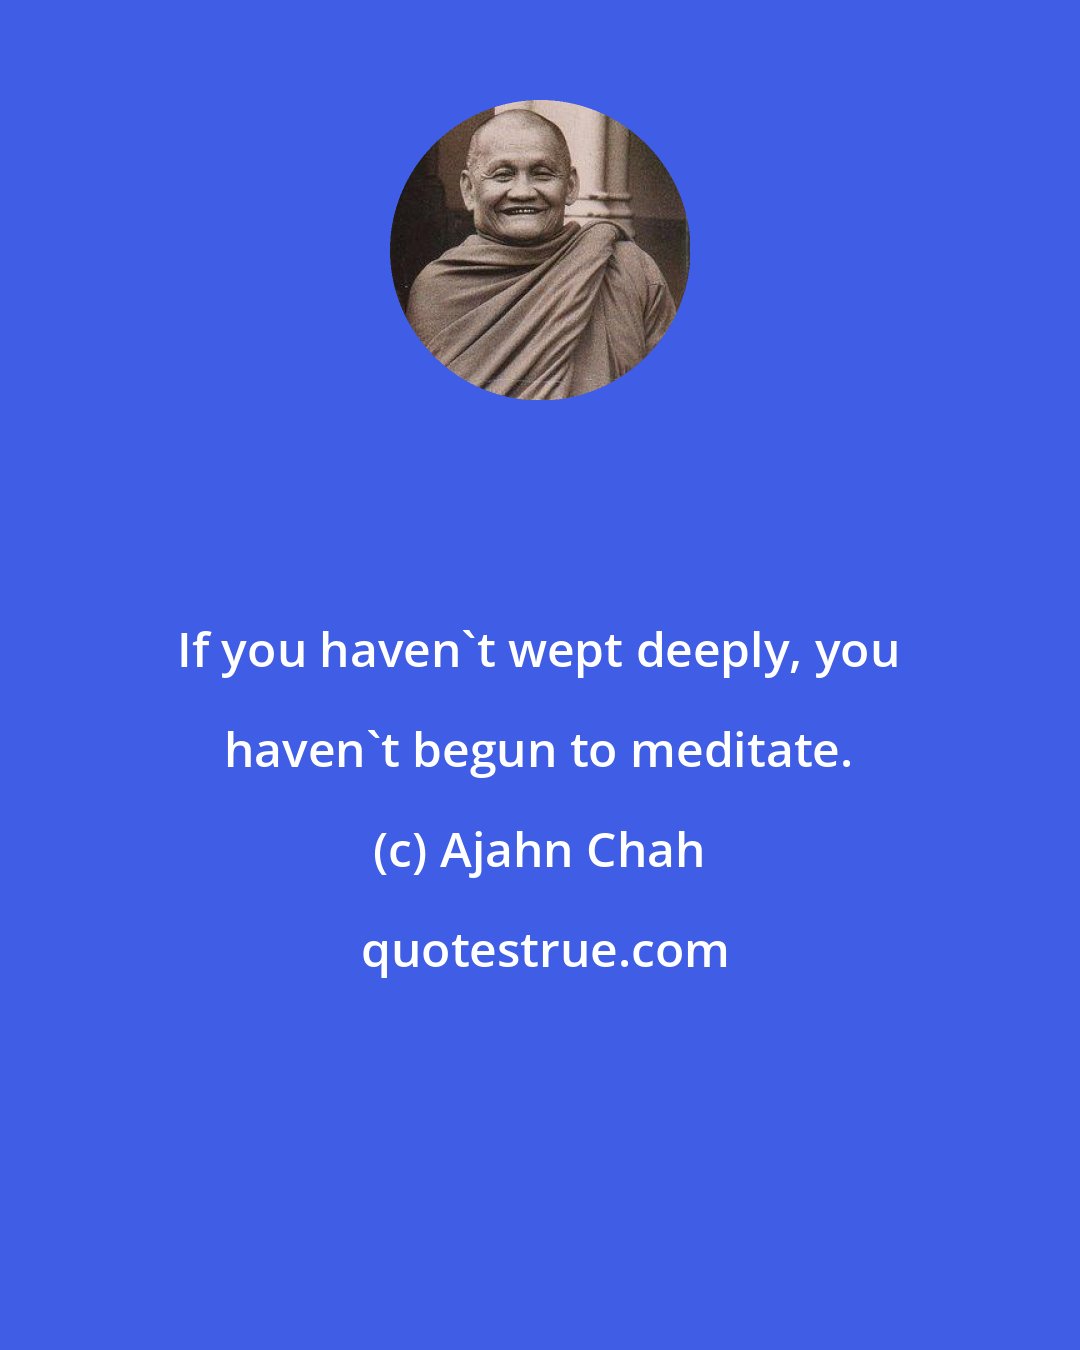 Ajahn Chah: If you haven't wept deeply, you haven't begun to meditate.